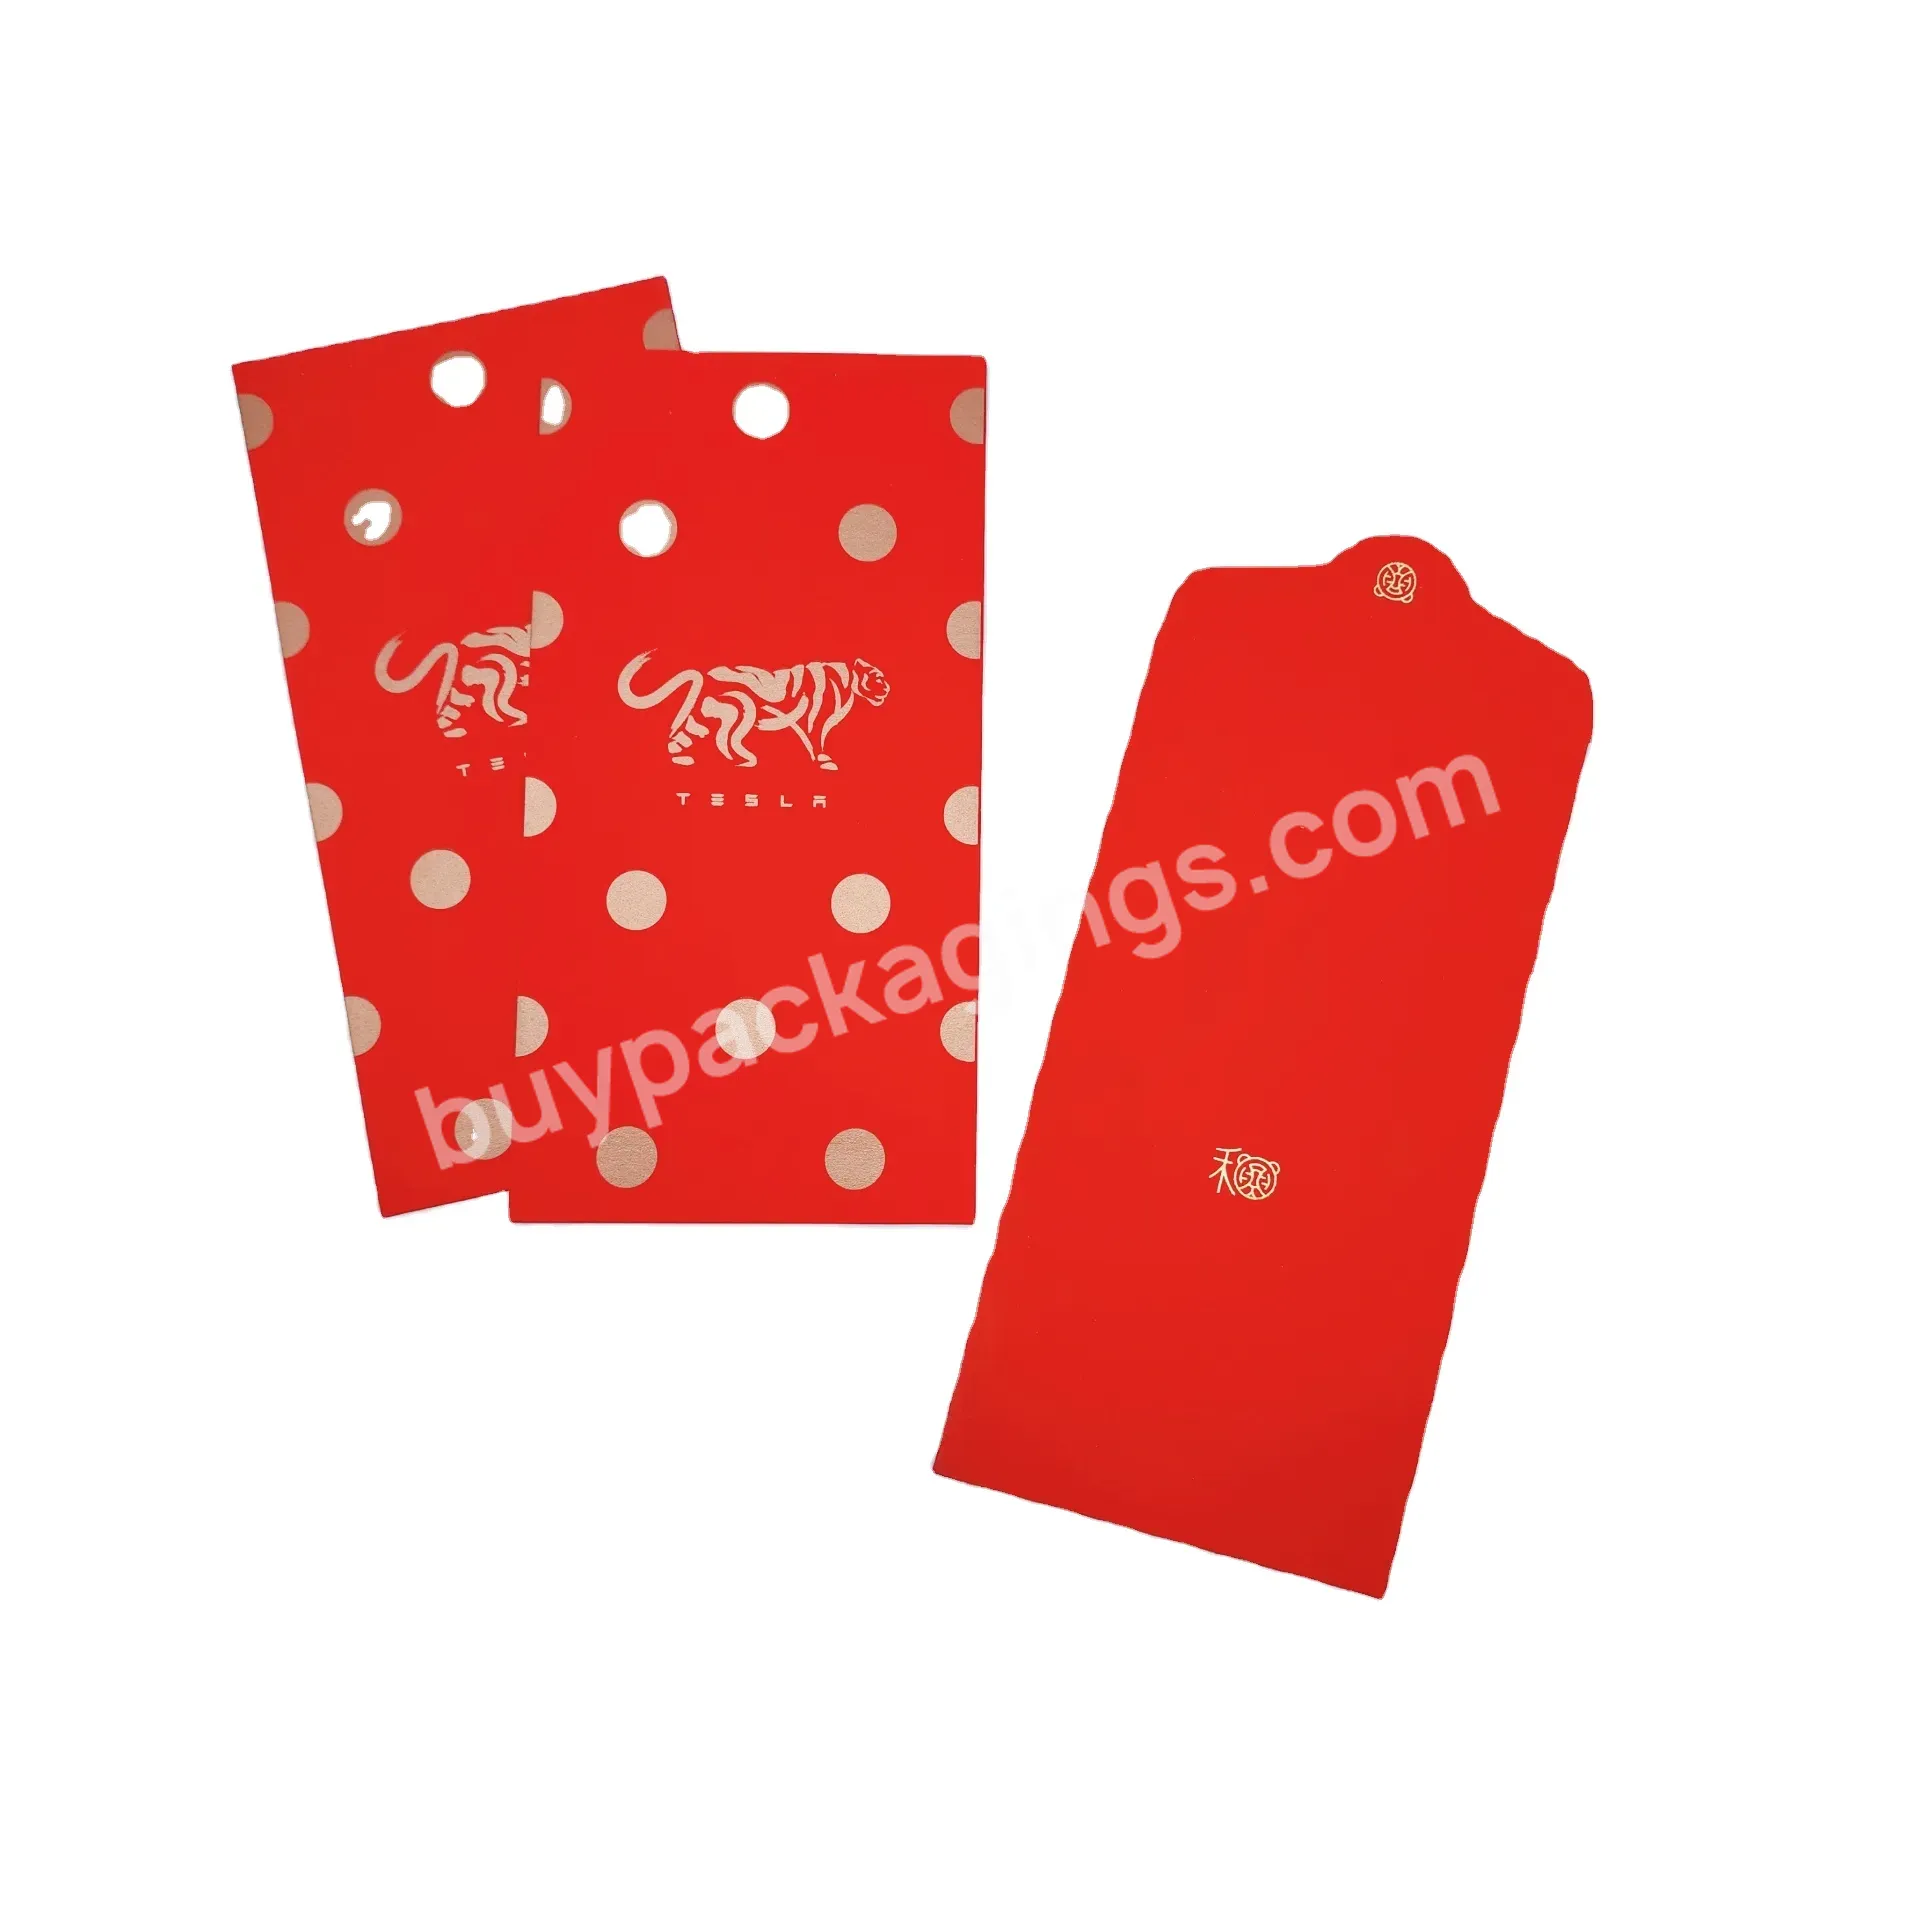 2023 Chinese/singapore New Trend Red Paper Envelope Printing Envelope Red Envelope Printing Manufacture - Buy Red Paper Envelope Printing,Red Envelope Printing Manufacture,2023 Chinese/singapore Red Money Envelope.